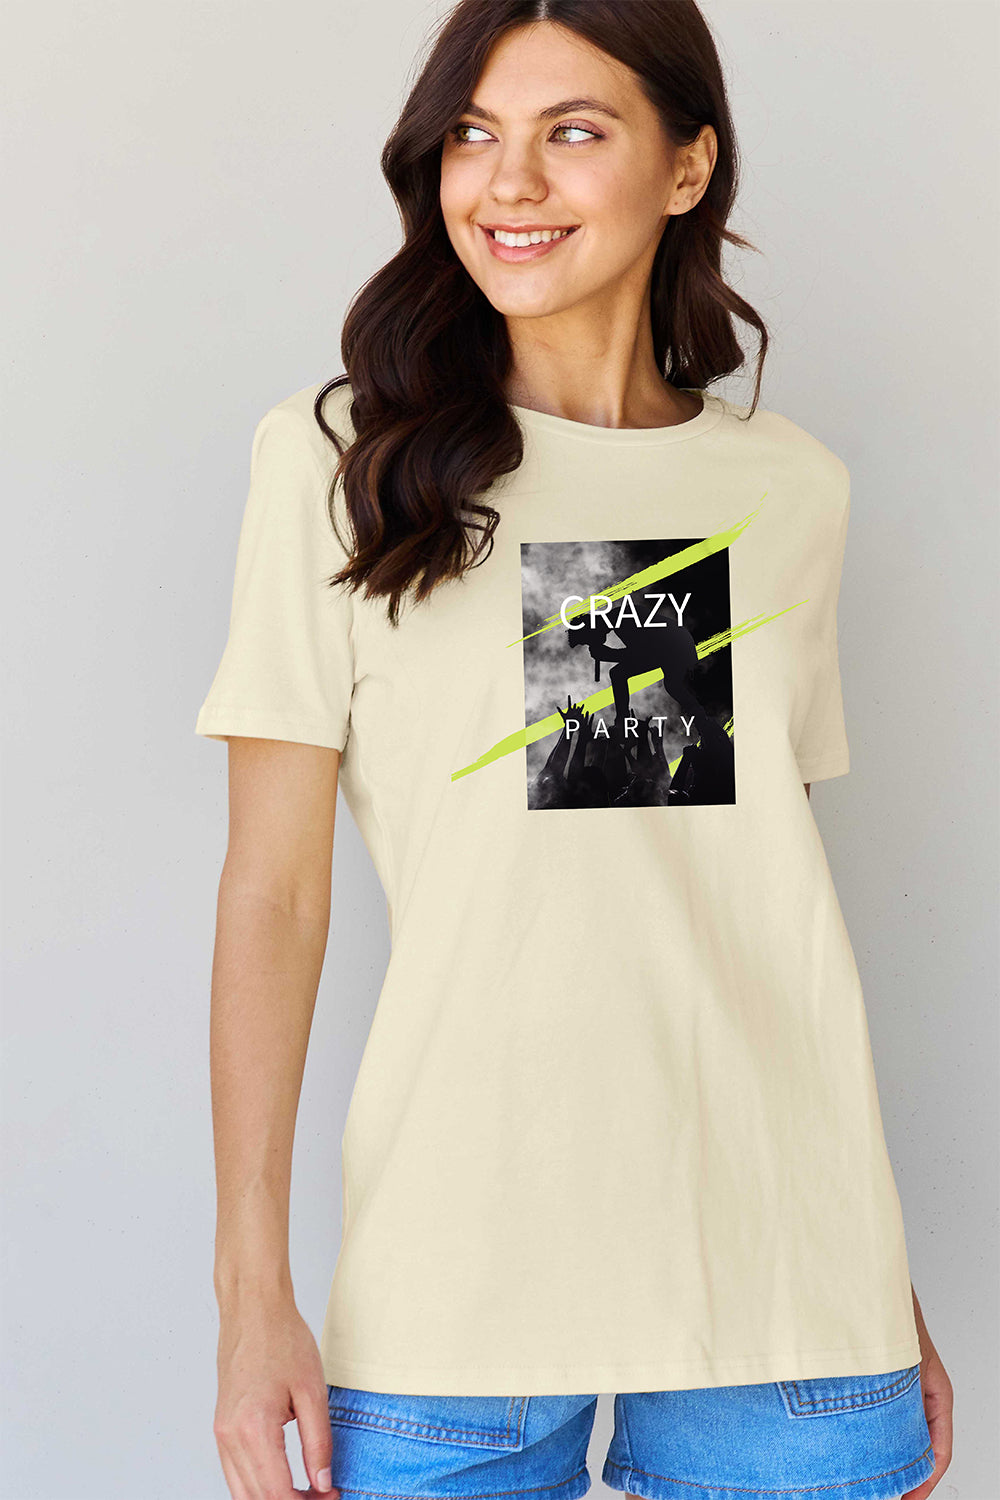 Simply Love Full Size CRAZY PARTY Graphic T-Shirt